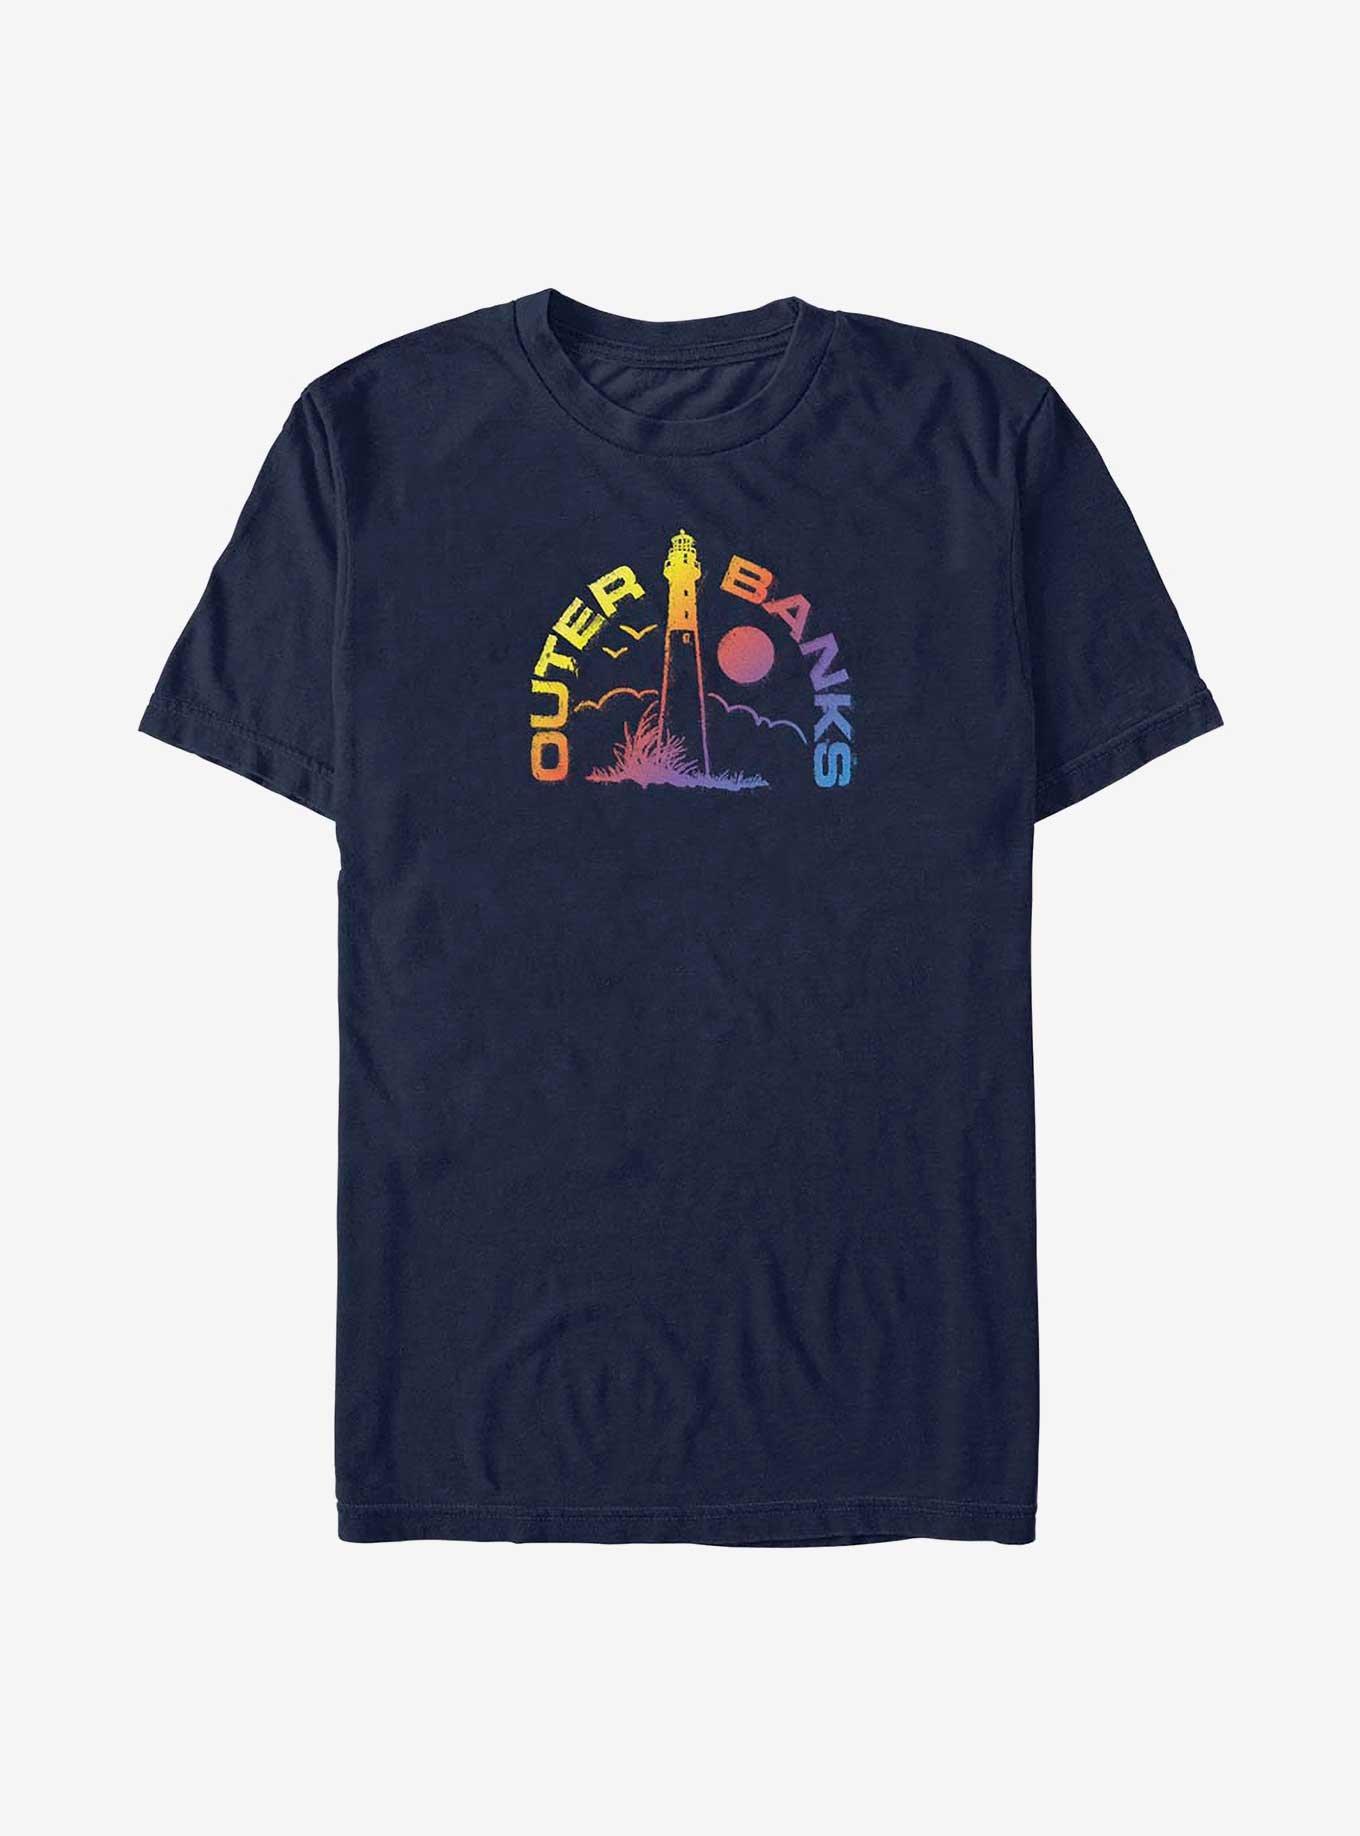 Outer Banks Lighthouse T-Shirt, NAVY, hi-res